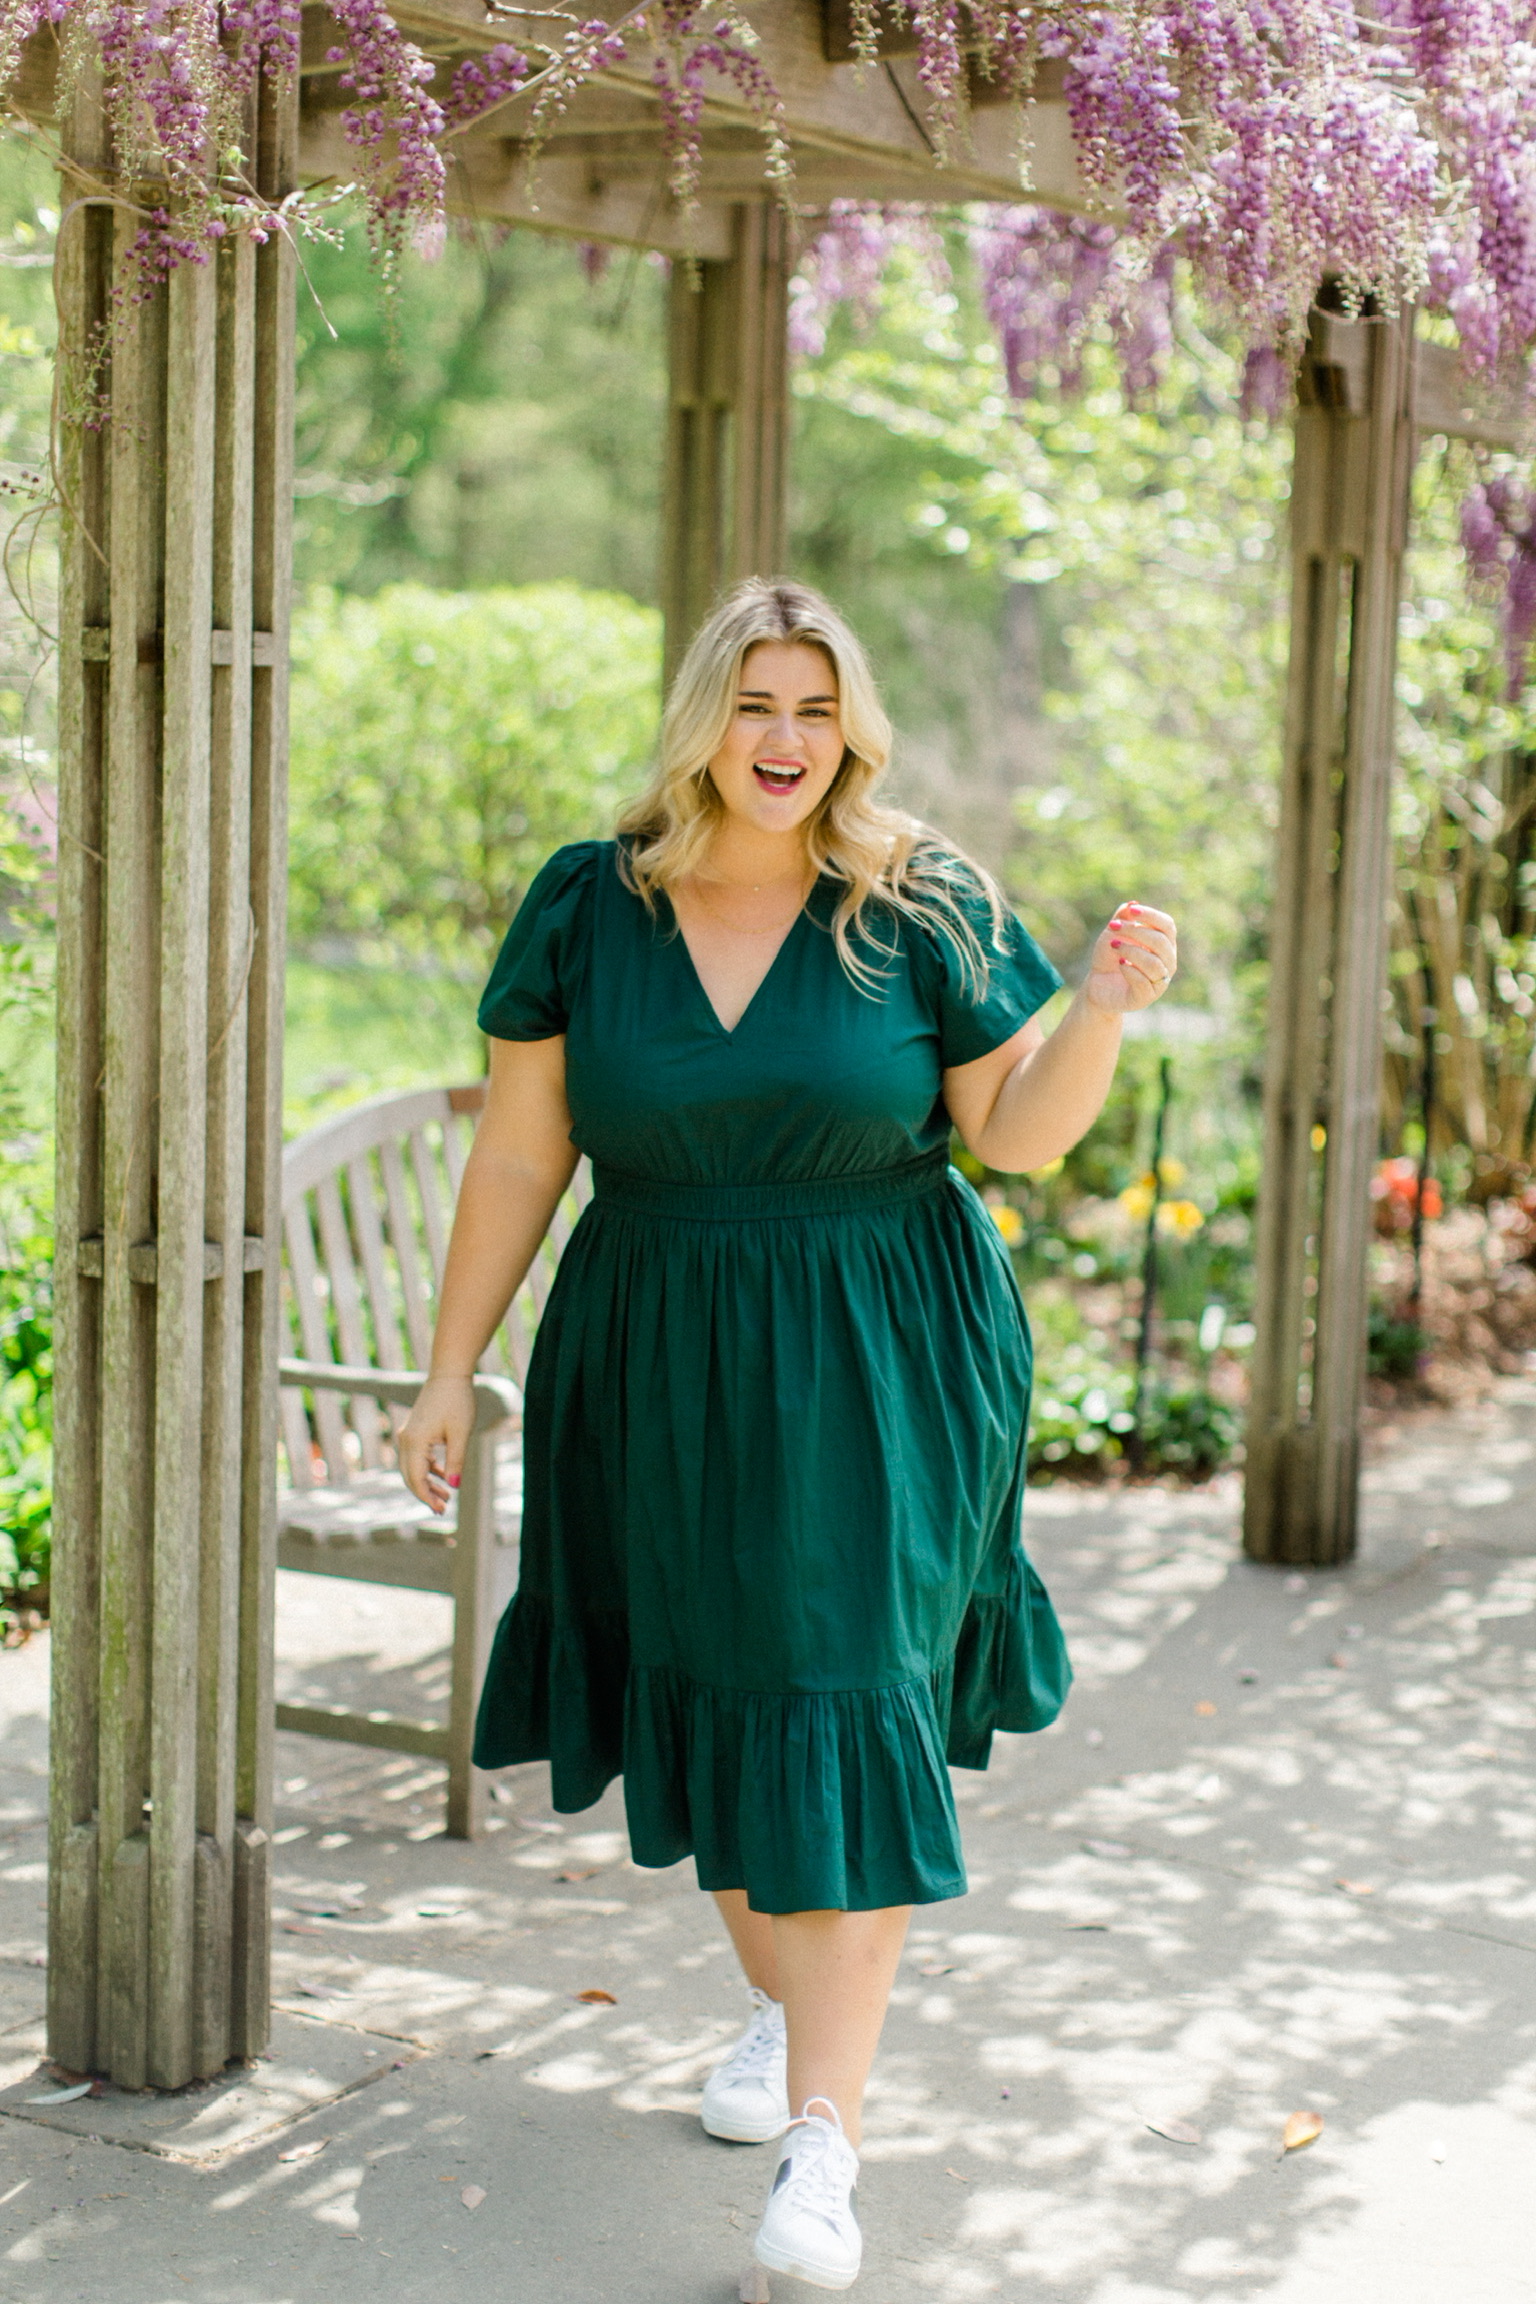 what would you wear under a sheer dress? : r/PlusSizeFashion